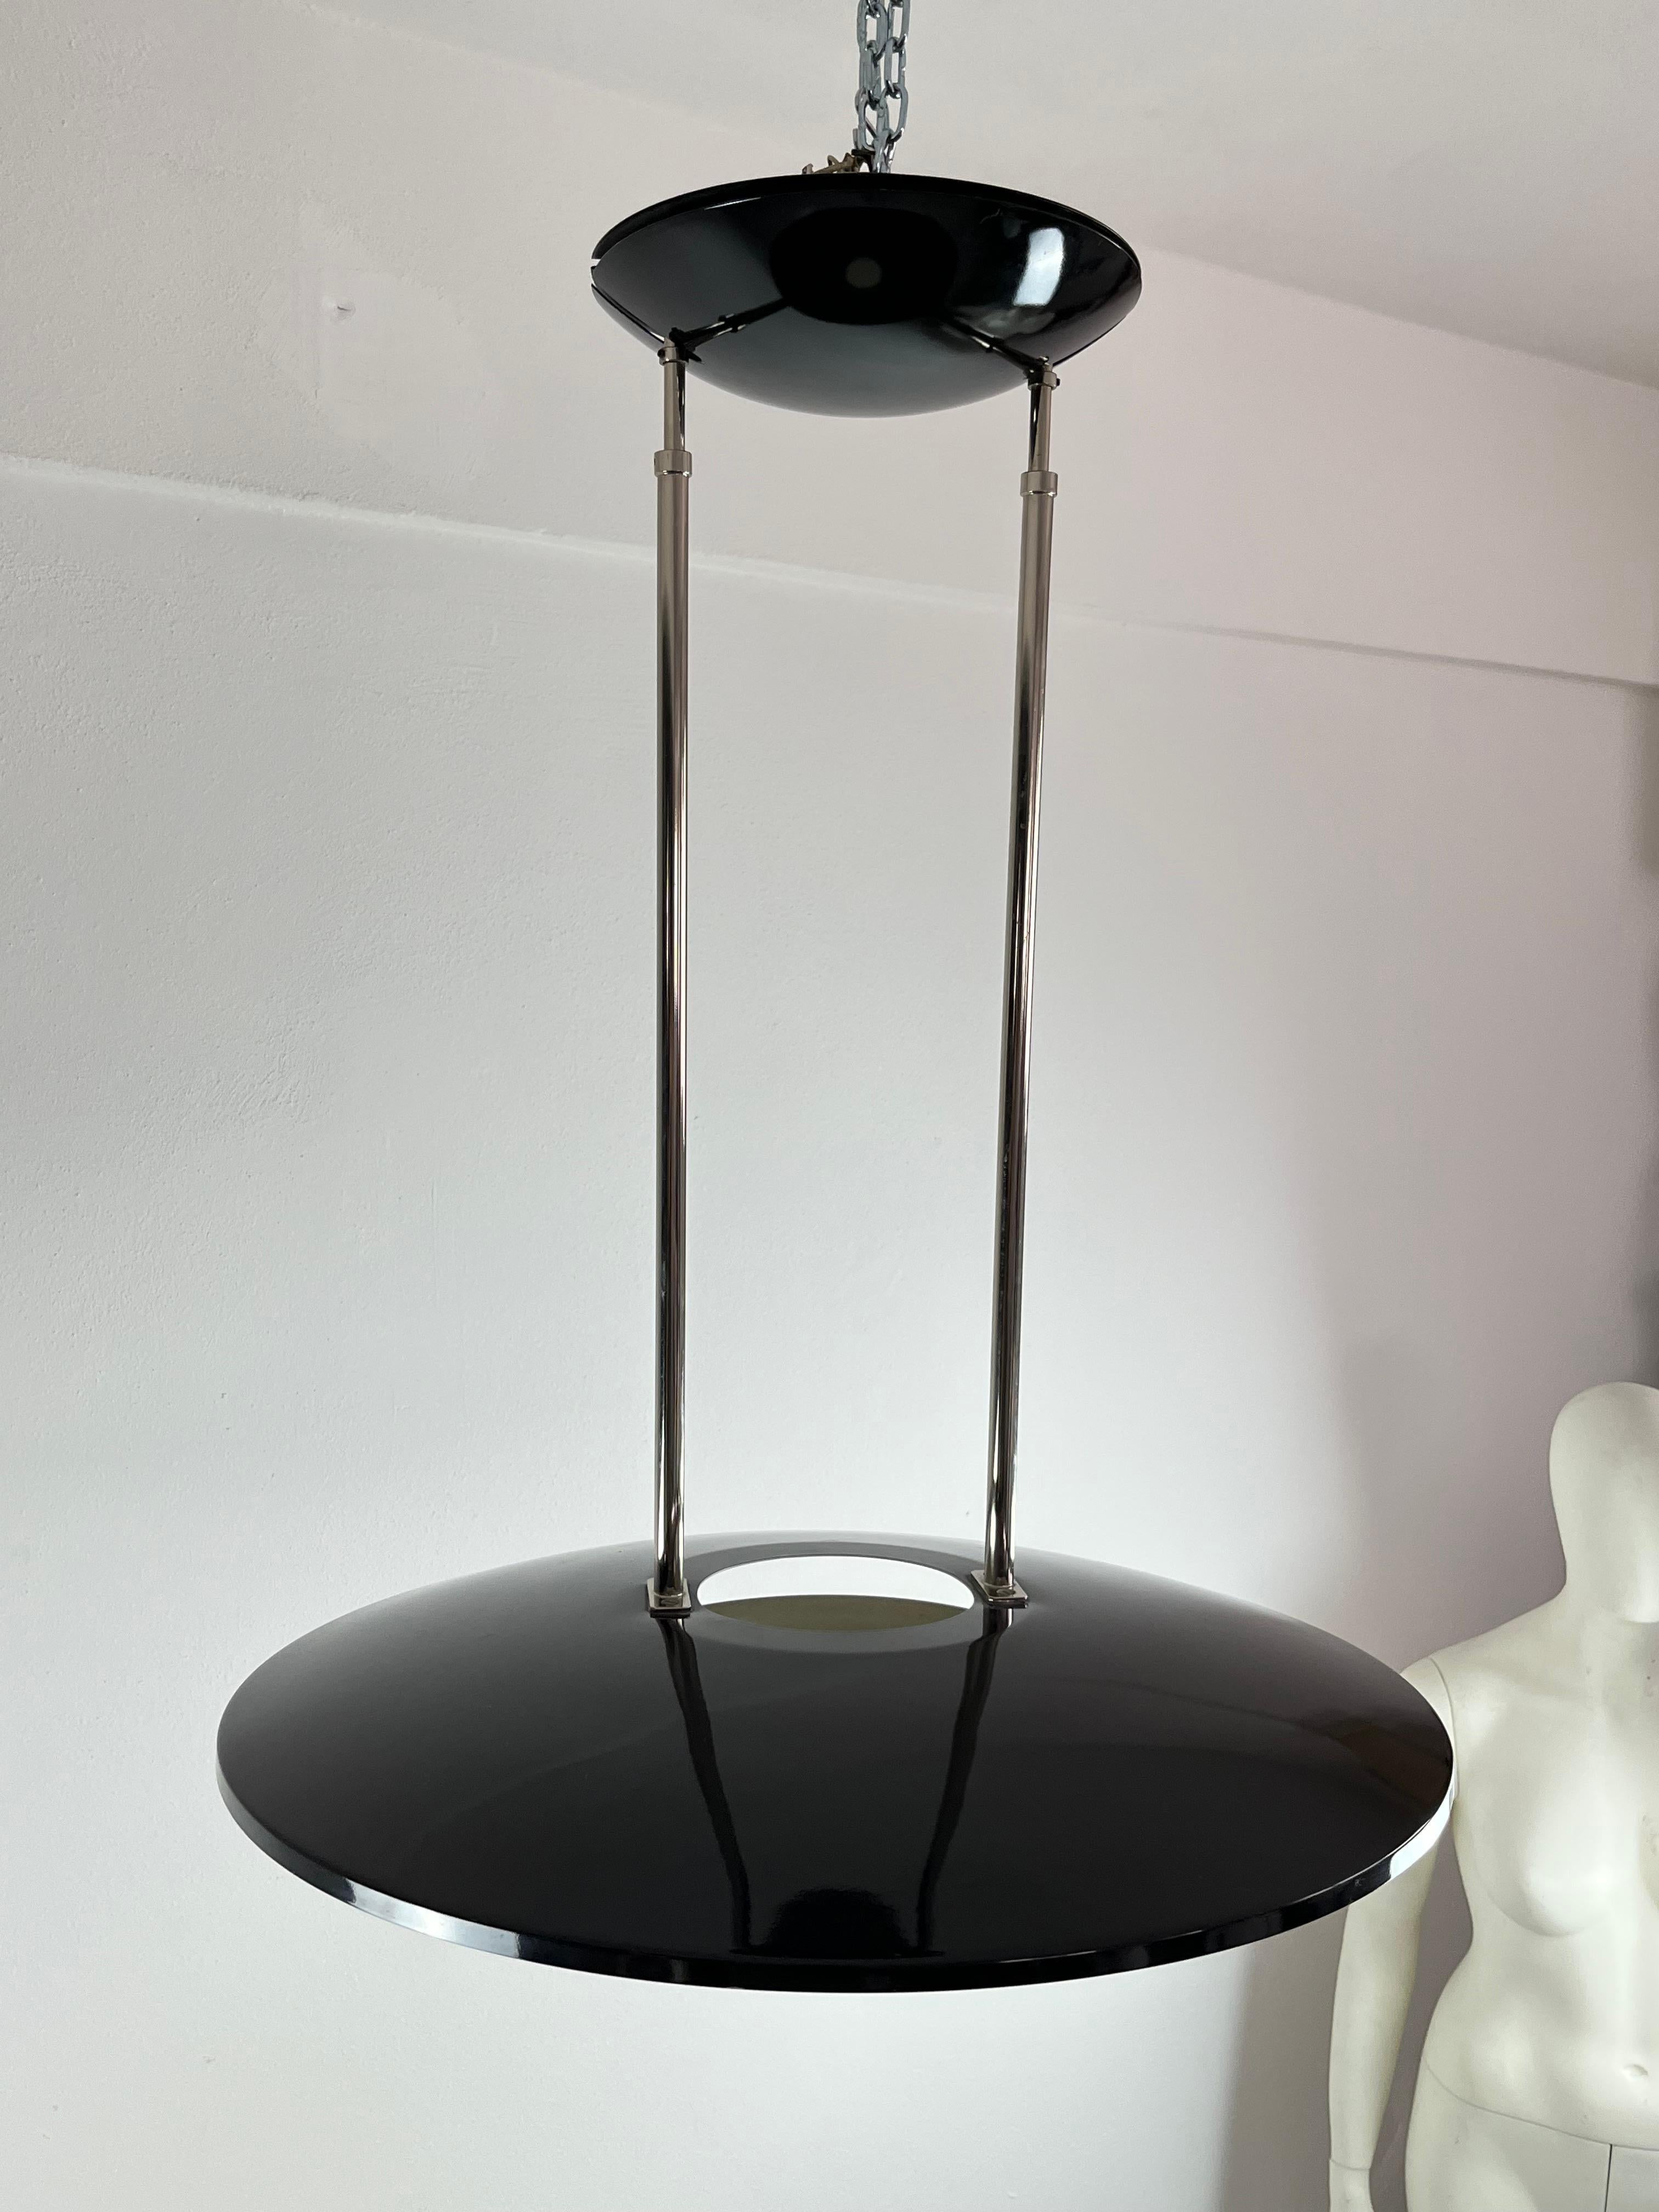 Vintage chandelier in enamelled aluminum and glass, Elio Martinelli for Martinelli Luce Italia, 80s/90s
Found in an interior designer's apartment, it has a diameter of 60 cm and a height of 76 cm
Halogen light.
It's a very nice object from the 80s.